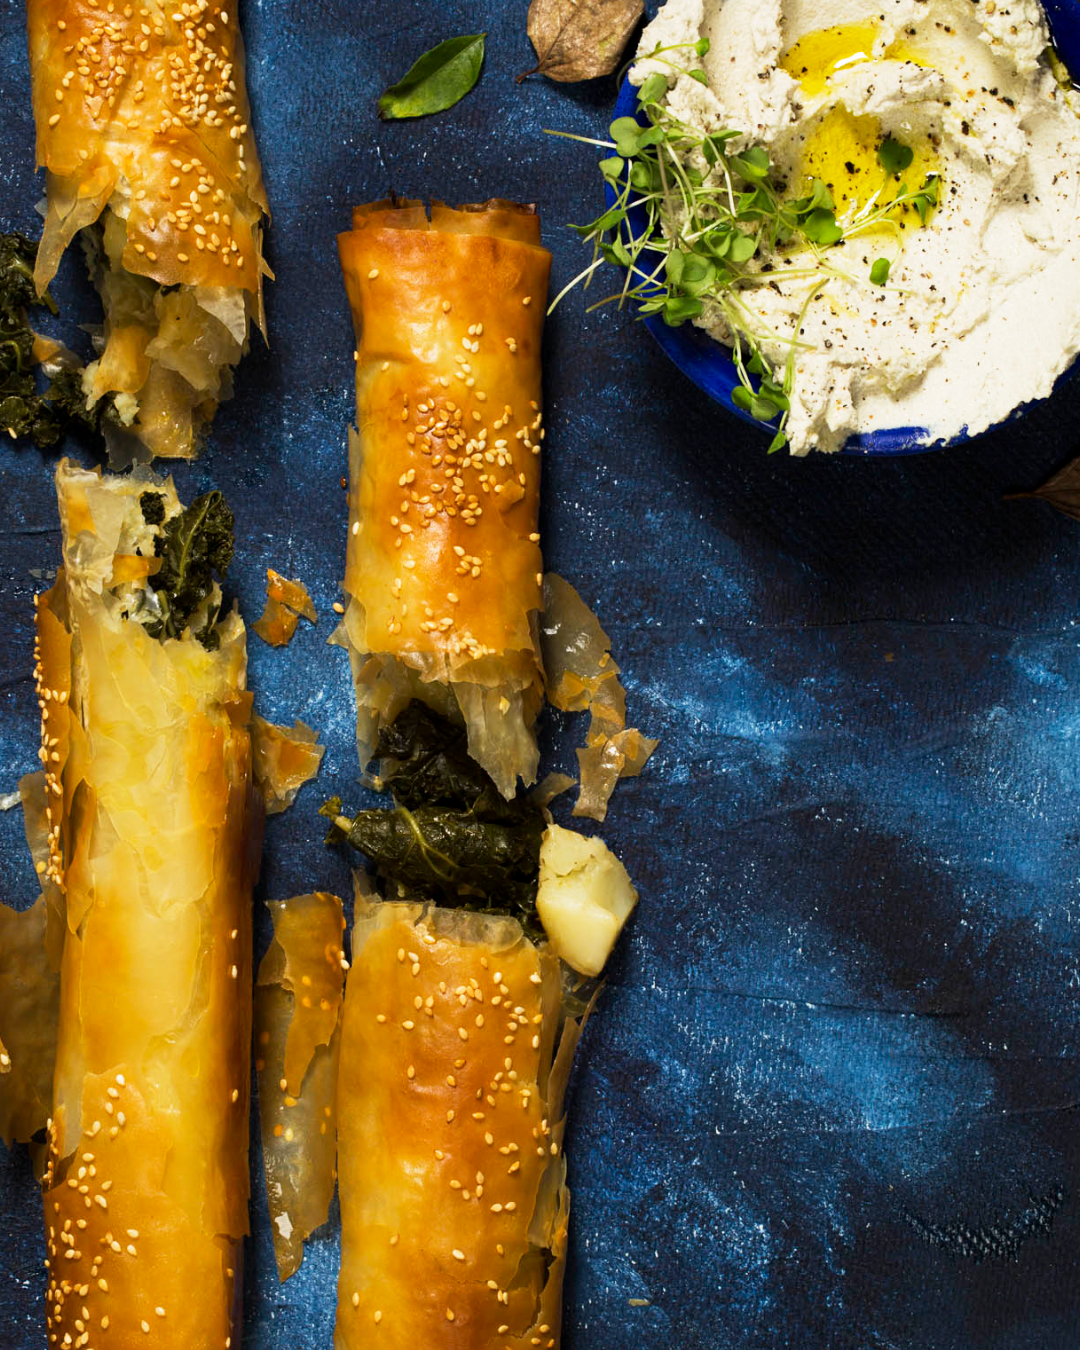 You are currently viewing Kale spanakopita with sunflower-seed mayo